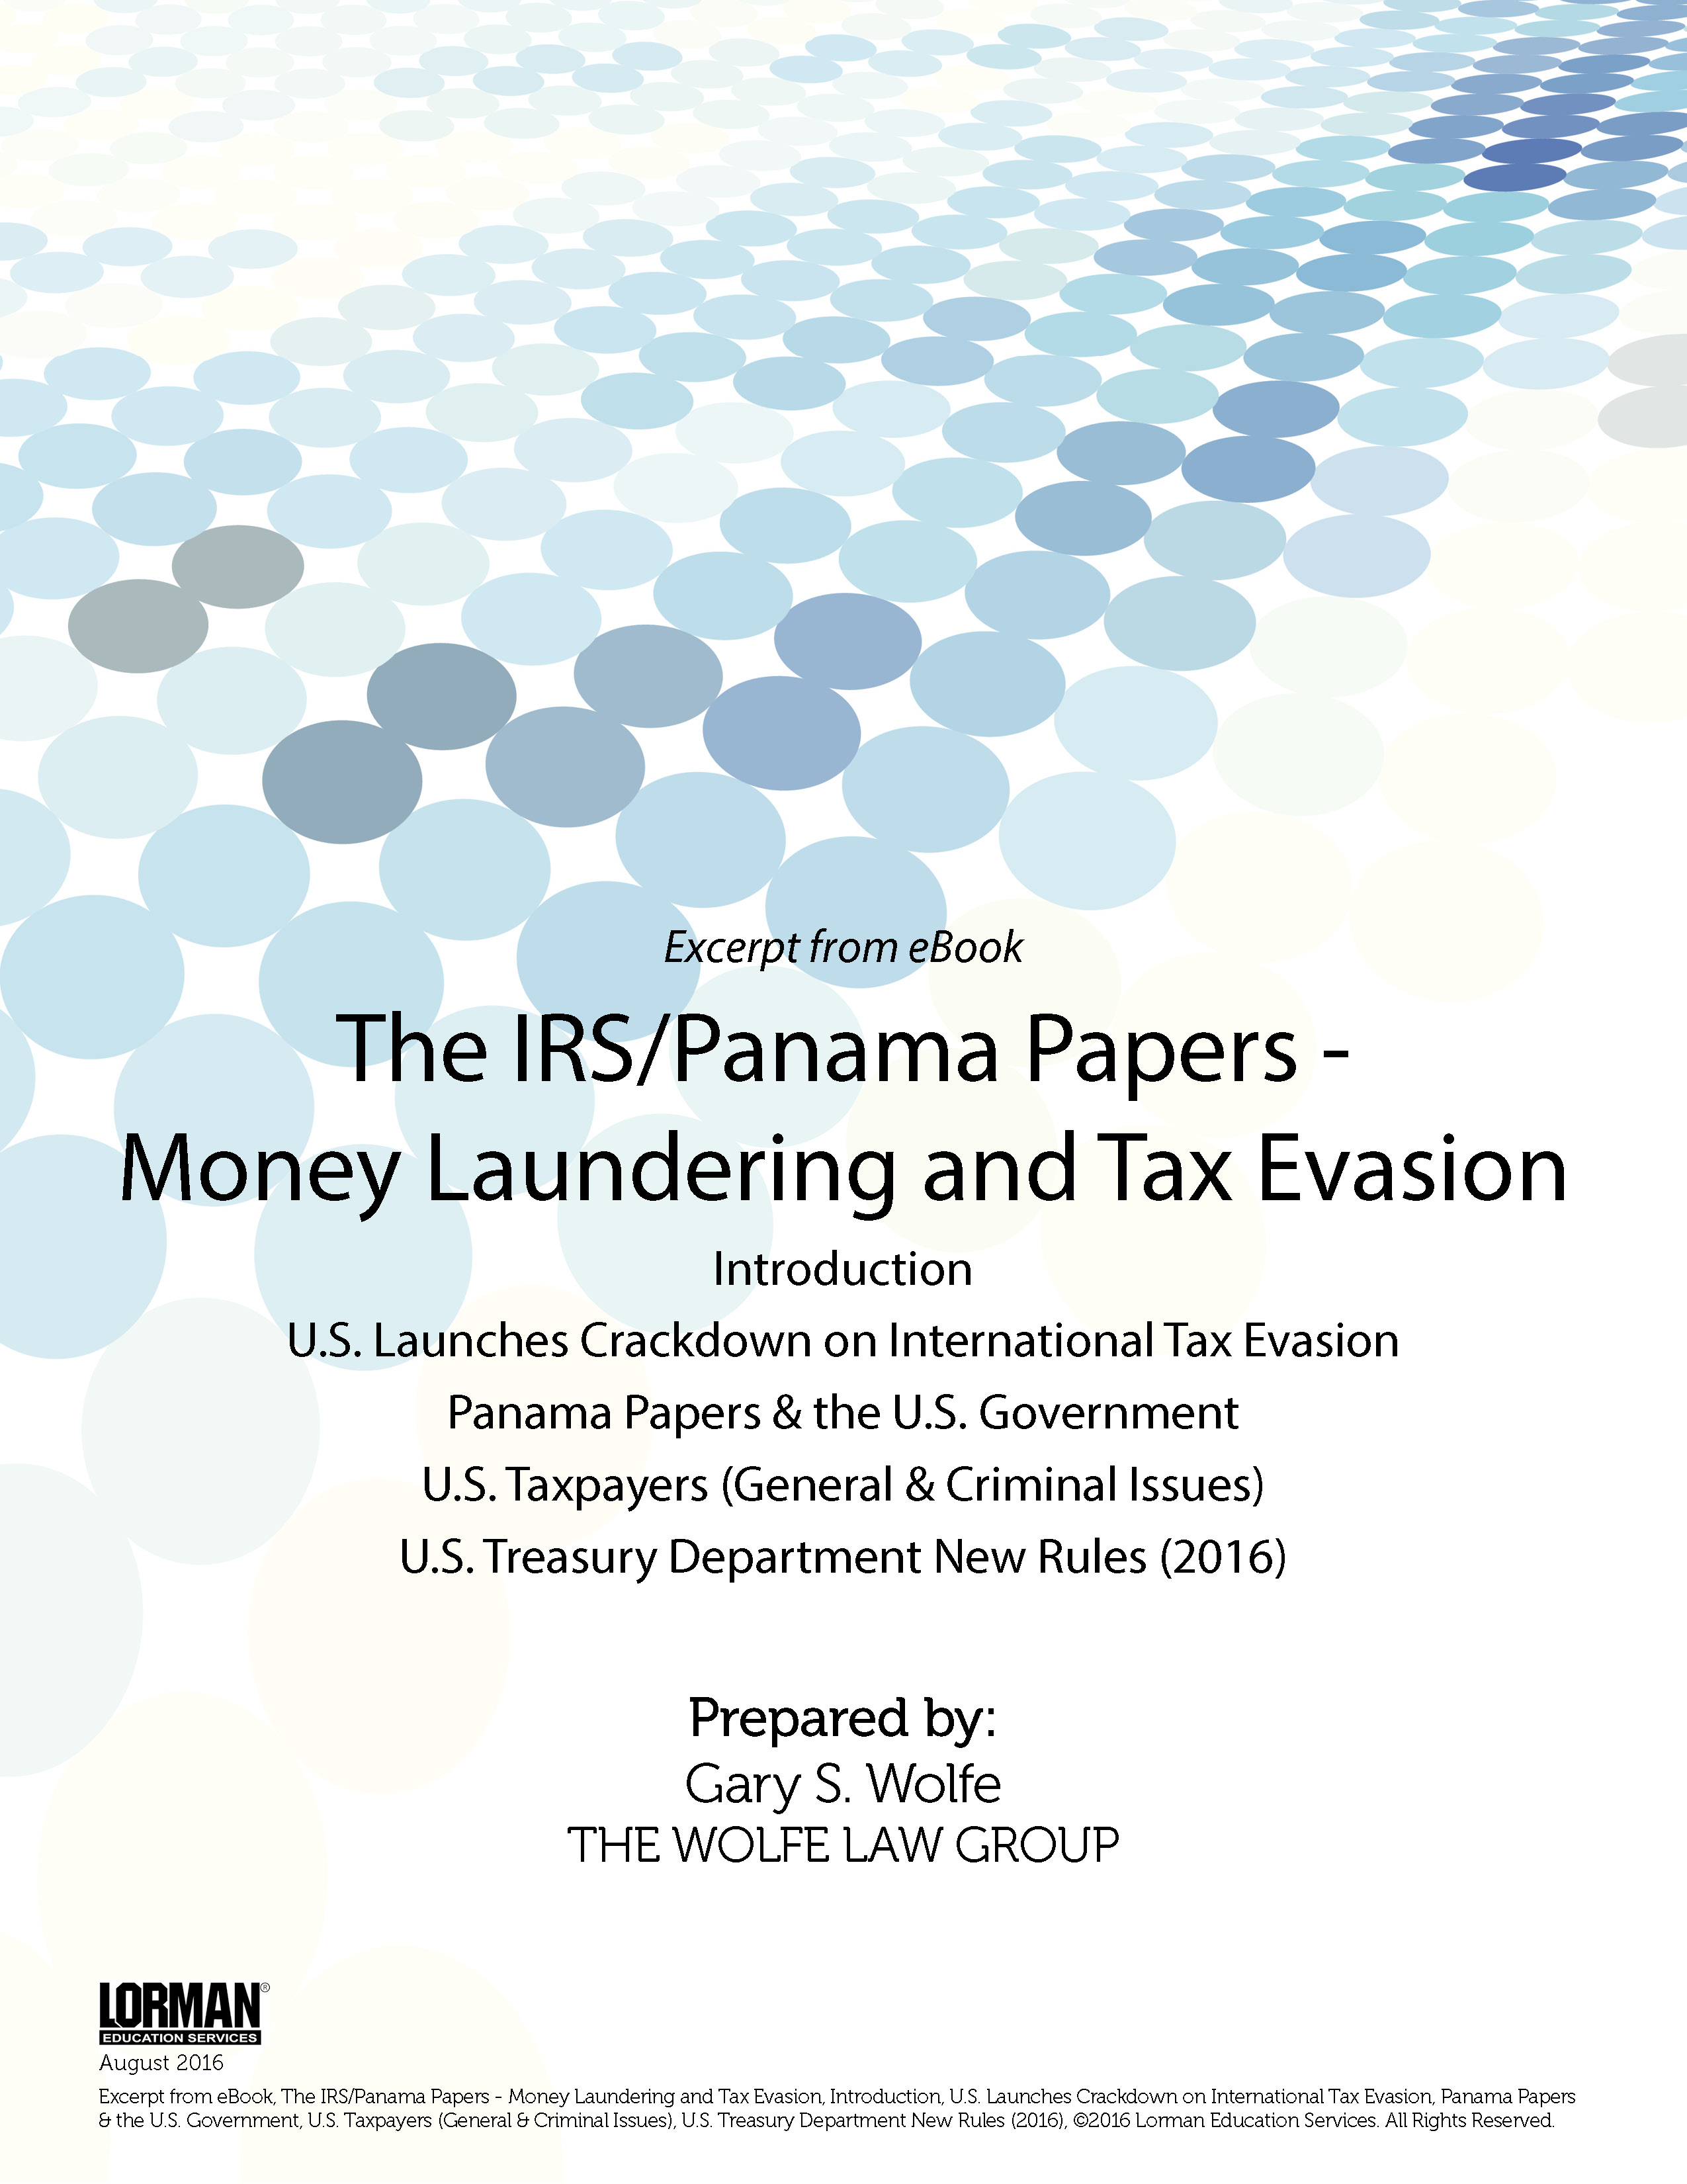 The IRS-Panama Papers - Money Laundering and International Tax Evasion; U.S. Treasury Department New Rules - 2016